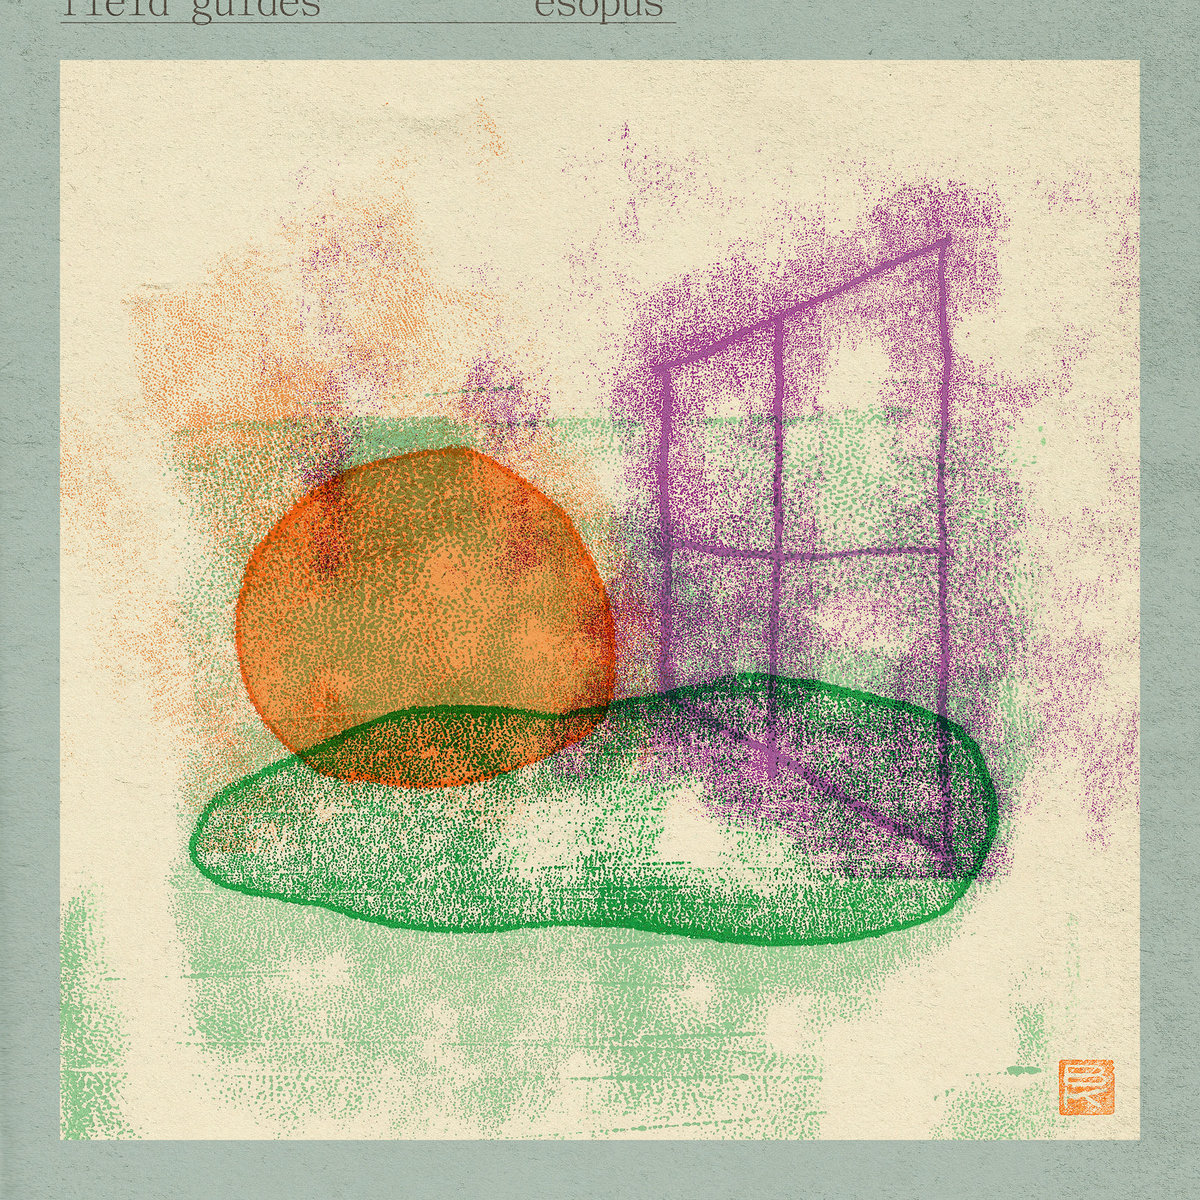 artwork for Esopus by Field Guides featuring a pastel drawing in green, orange and purple